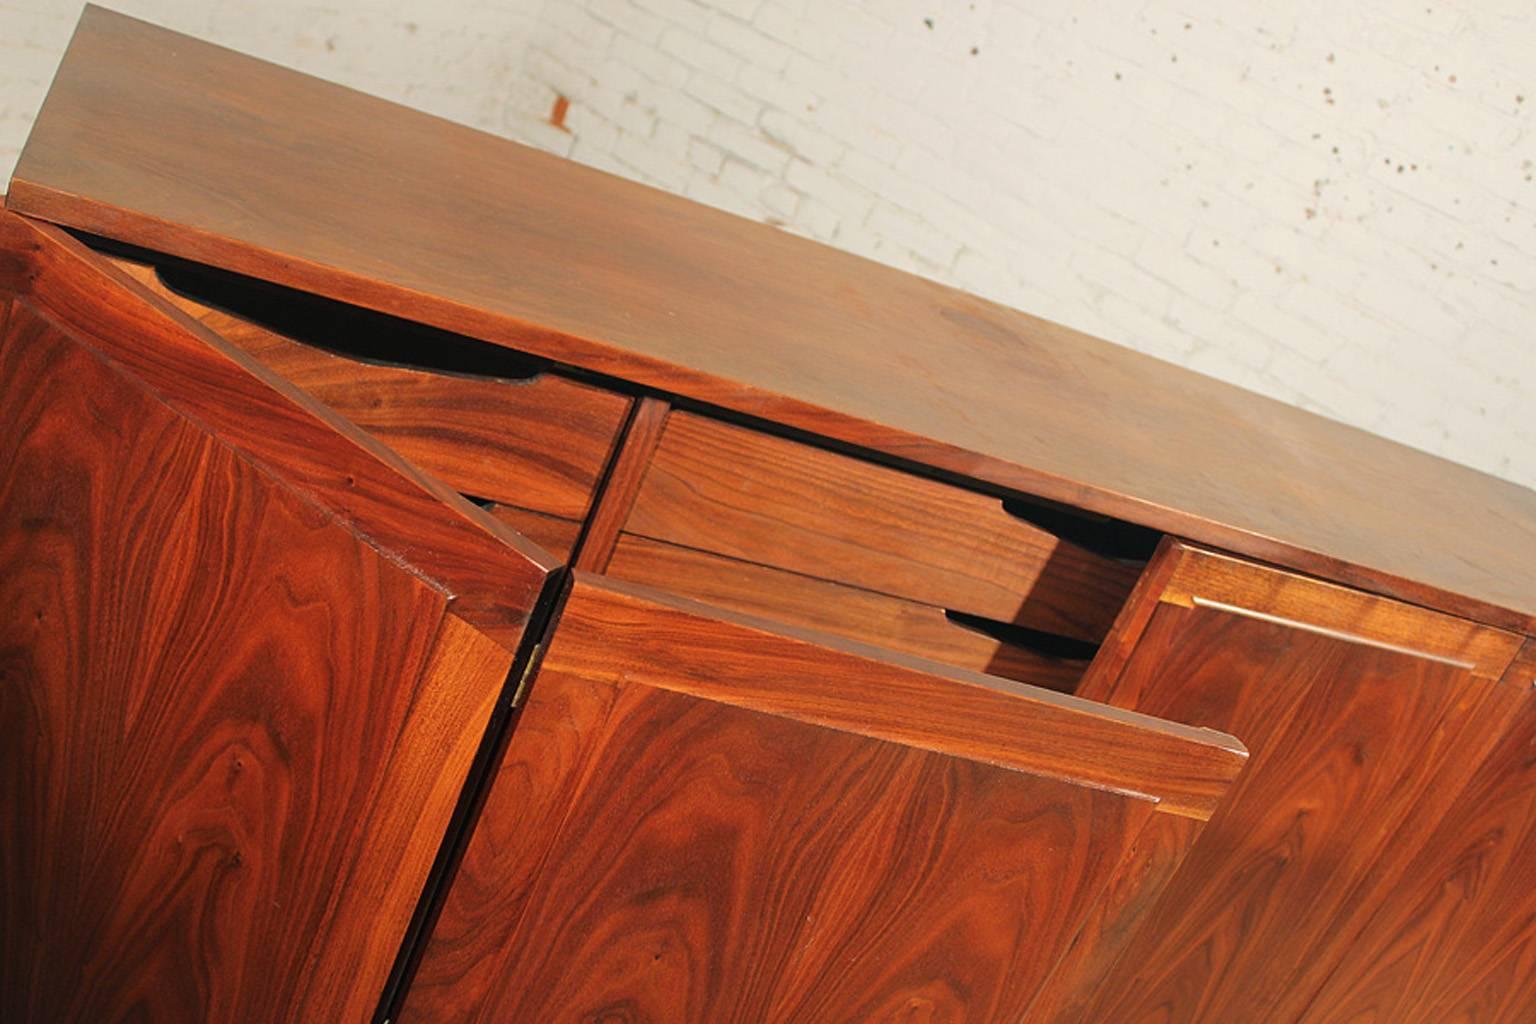 Buffet or credenza in bookmatched Honduran rosewood, circa 1960s. Designed by Jack Cartwright for the Founders Furniture Company. In wonderful vintage condition.

This buffet cabinet or credenza by Jack Cartwright for Founders Furniture Company is